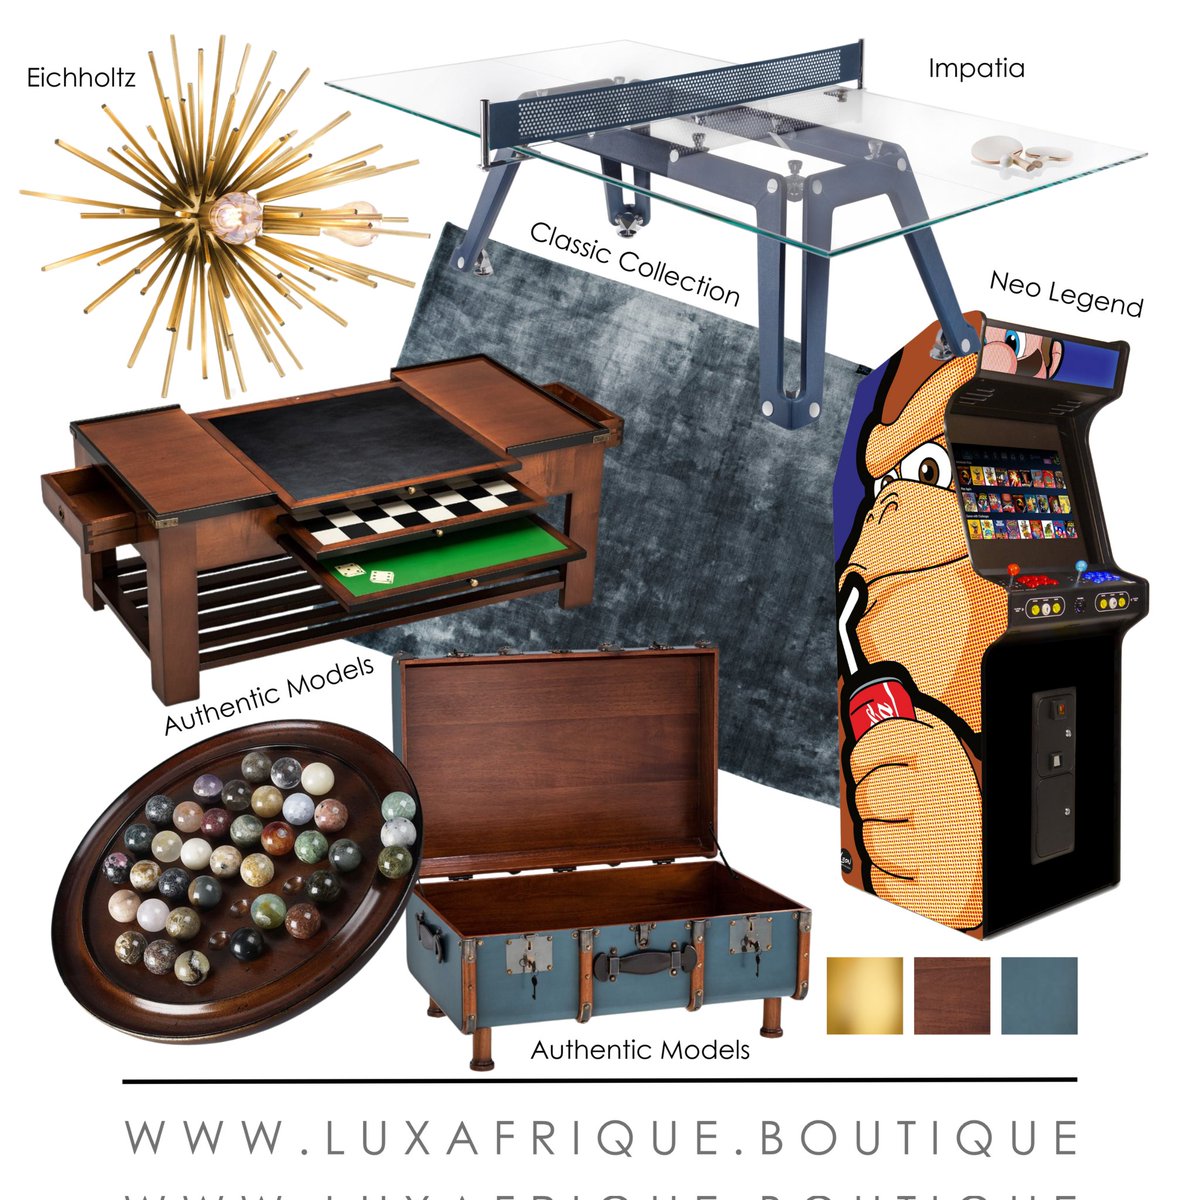 Create the ultimate retreat for the king of the castle!

Visit Lux Afrique Boutique's impressive homeware section or contact our personal shoppers to source anything you might desire: luxafrique.boutique/en-za/collecti…

#luxafriqueboutique #homedecor #interiordesign